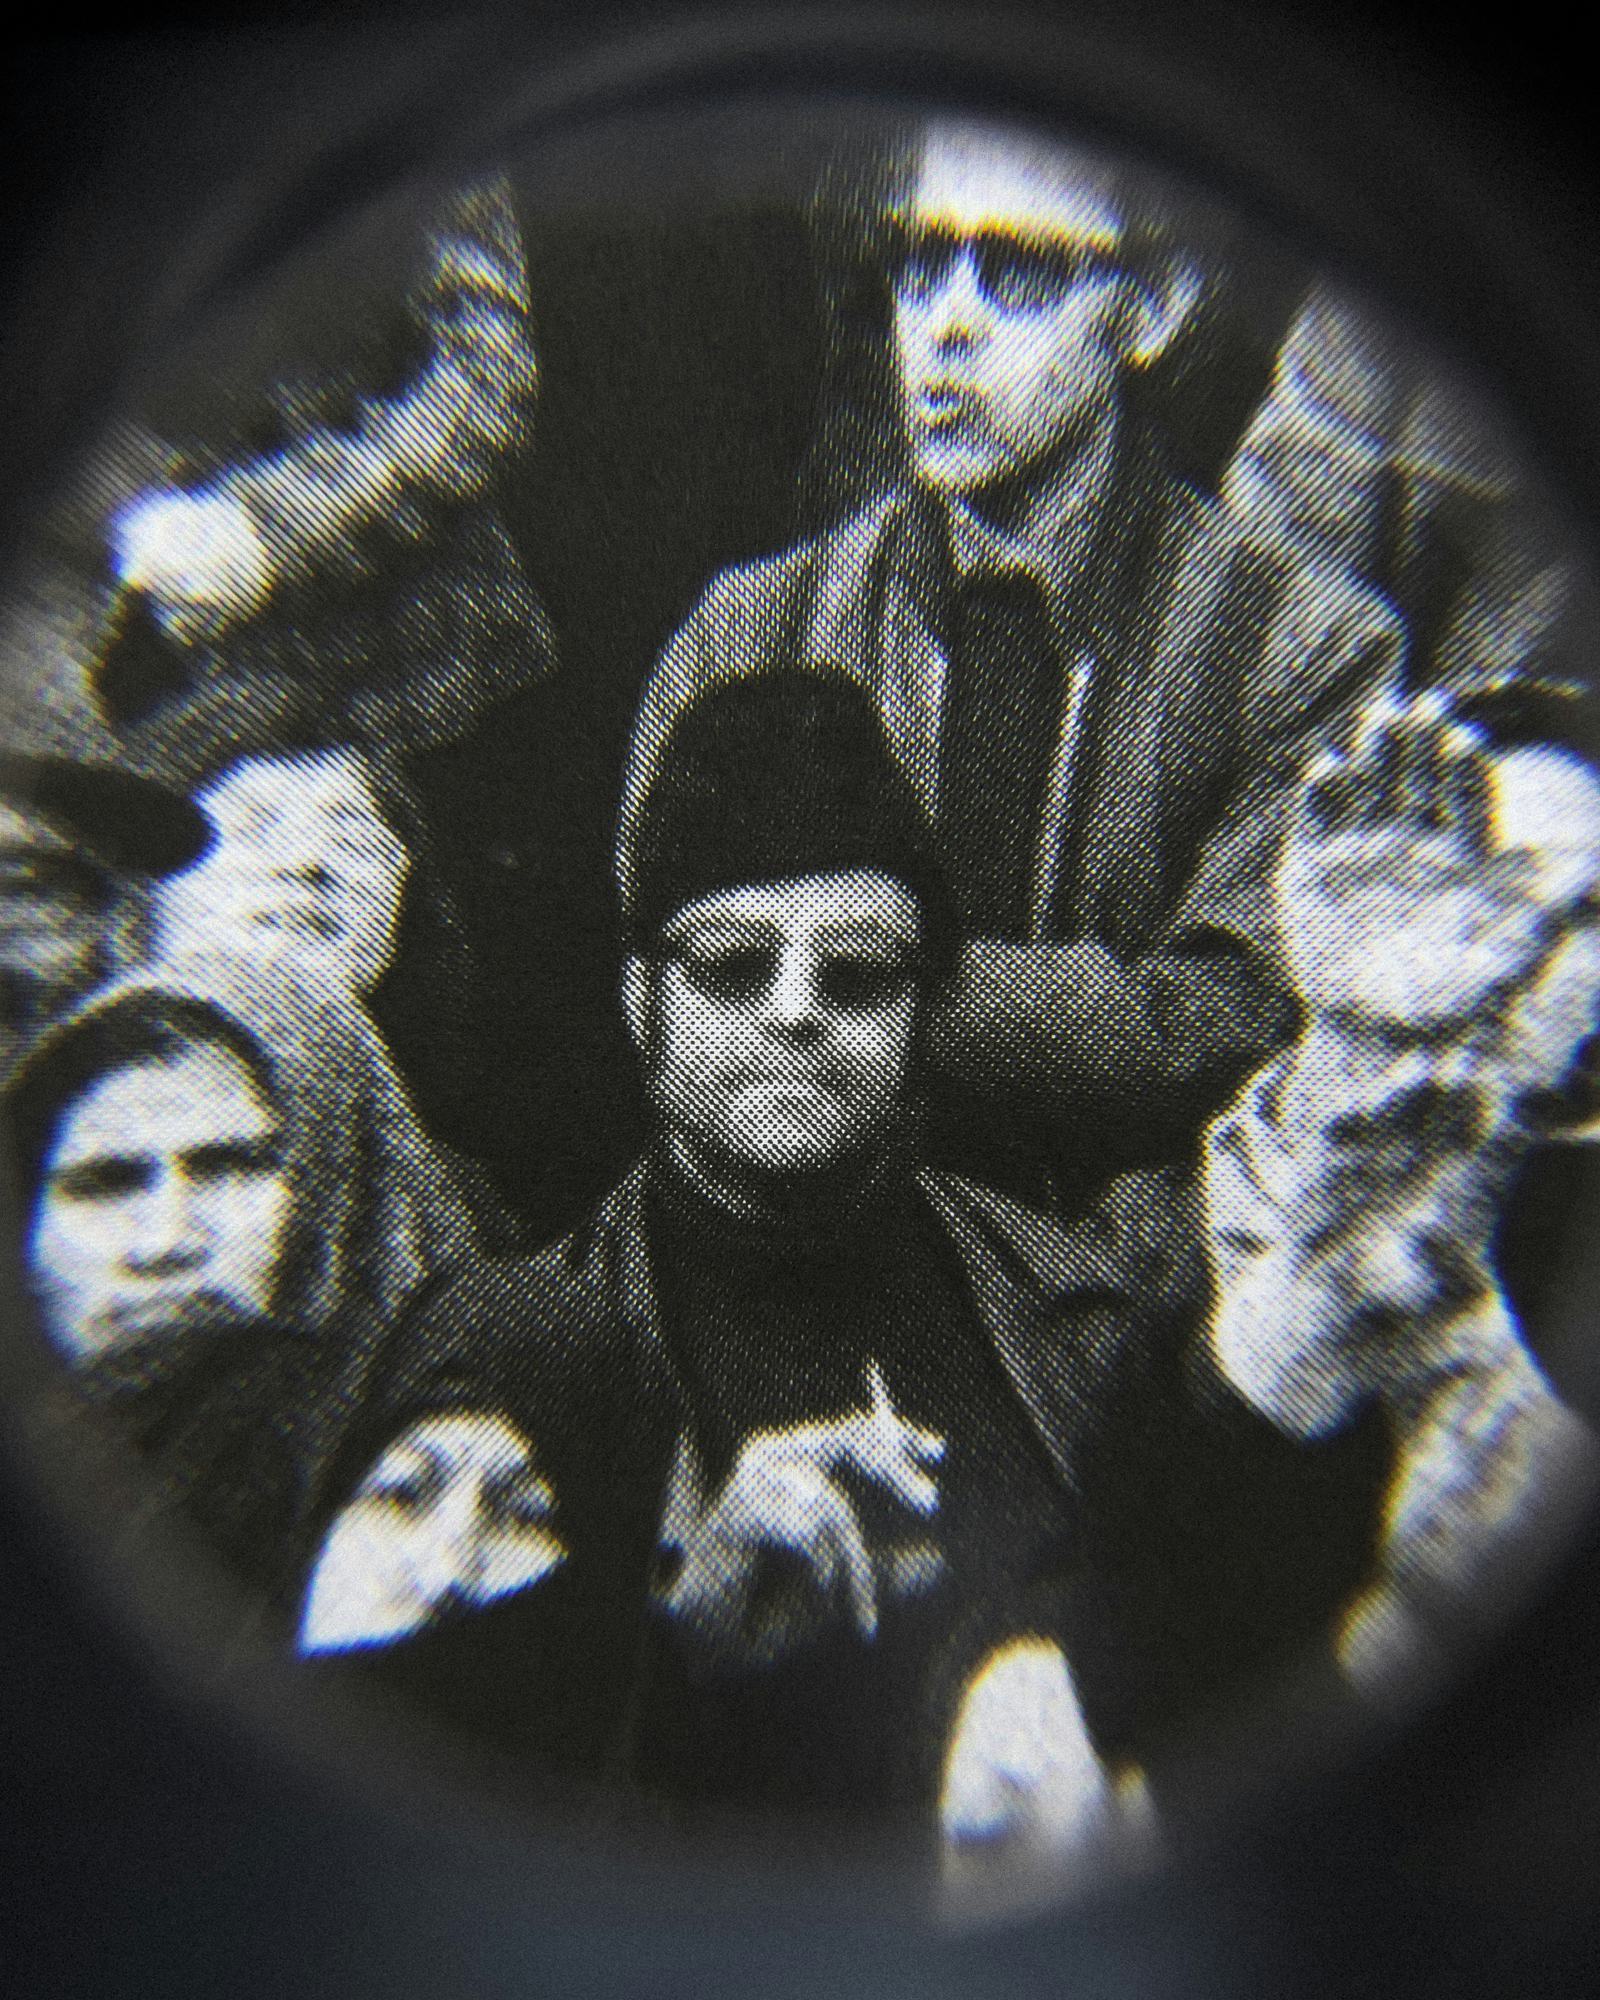 Black and white close-up image of an existing photograph, showing a man, wearing sunglasses and smoking a cigarette, staring into the camera in the middle of protesting crowd. Shot through a magnifying lens © Amin Yousefi© Amin Yousefi